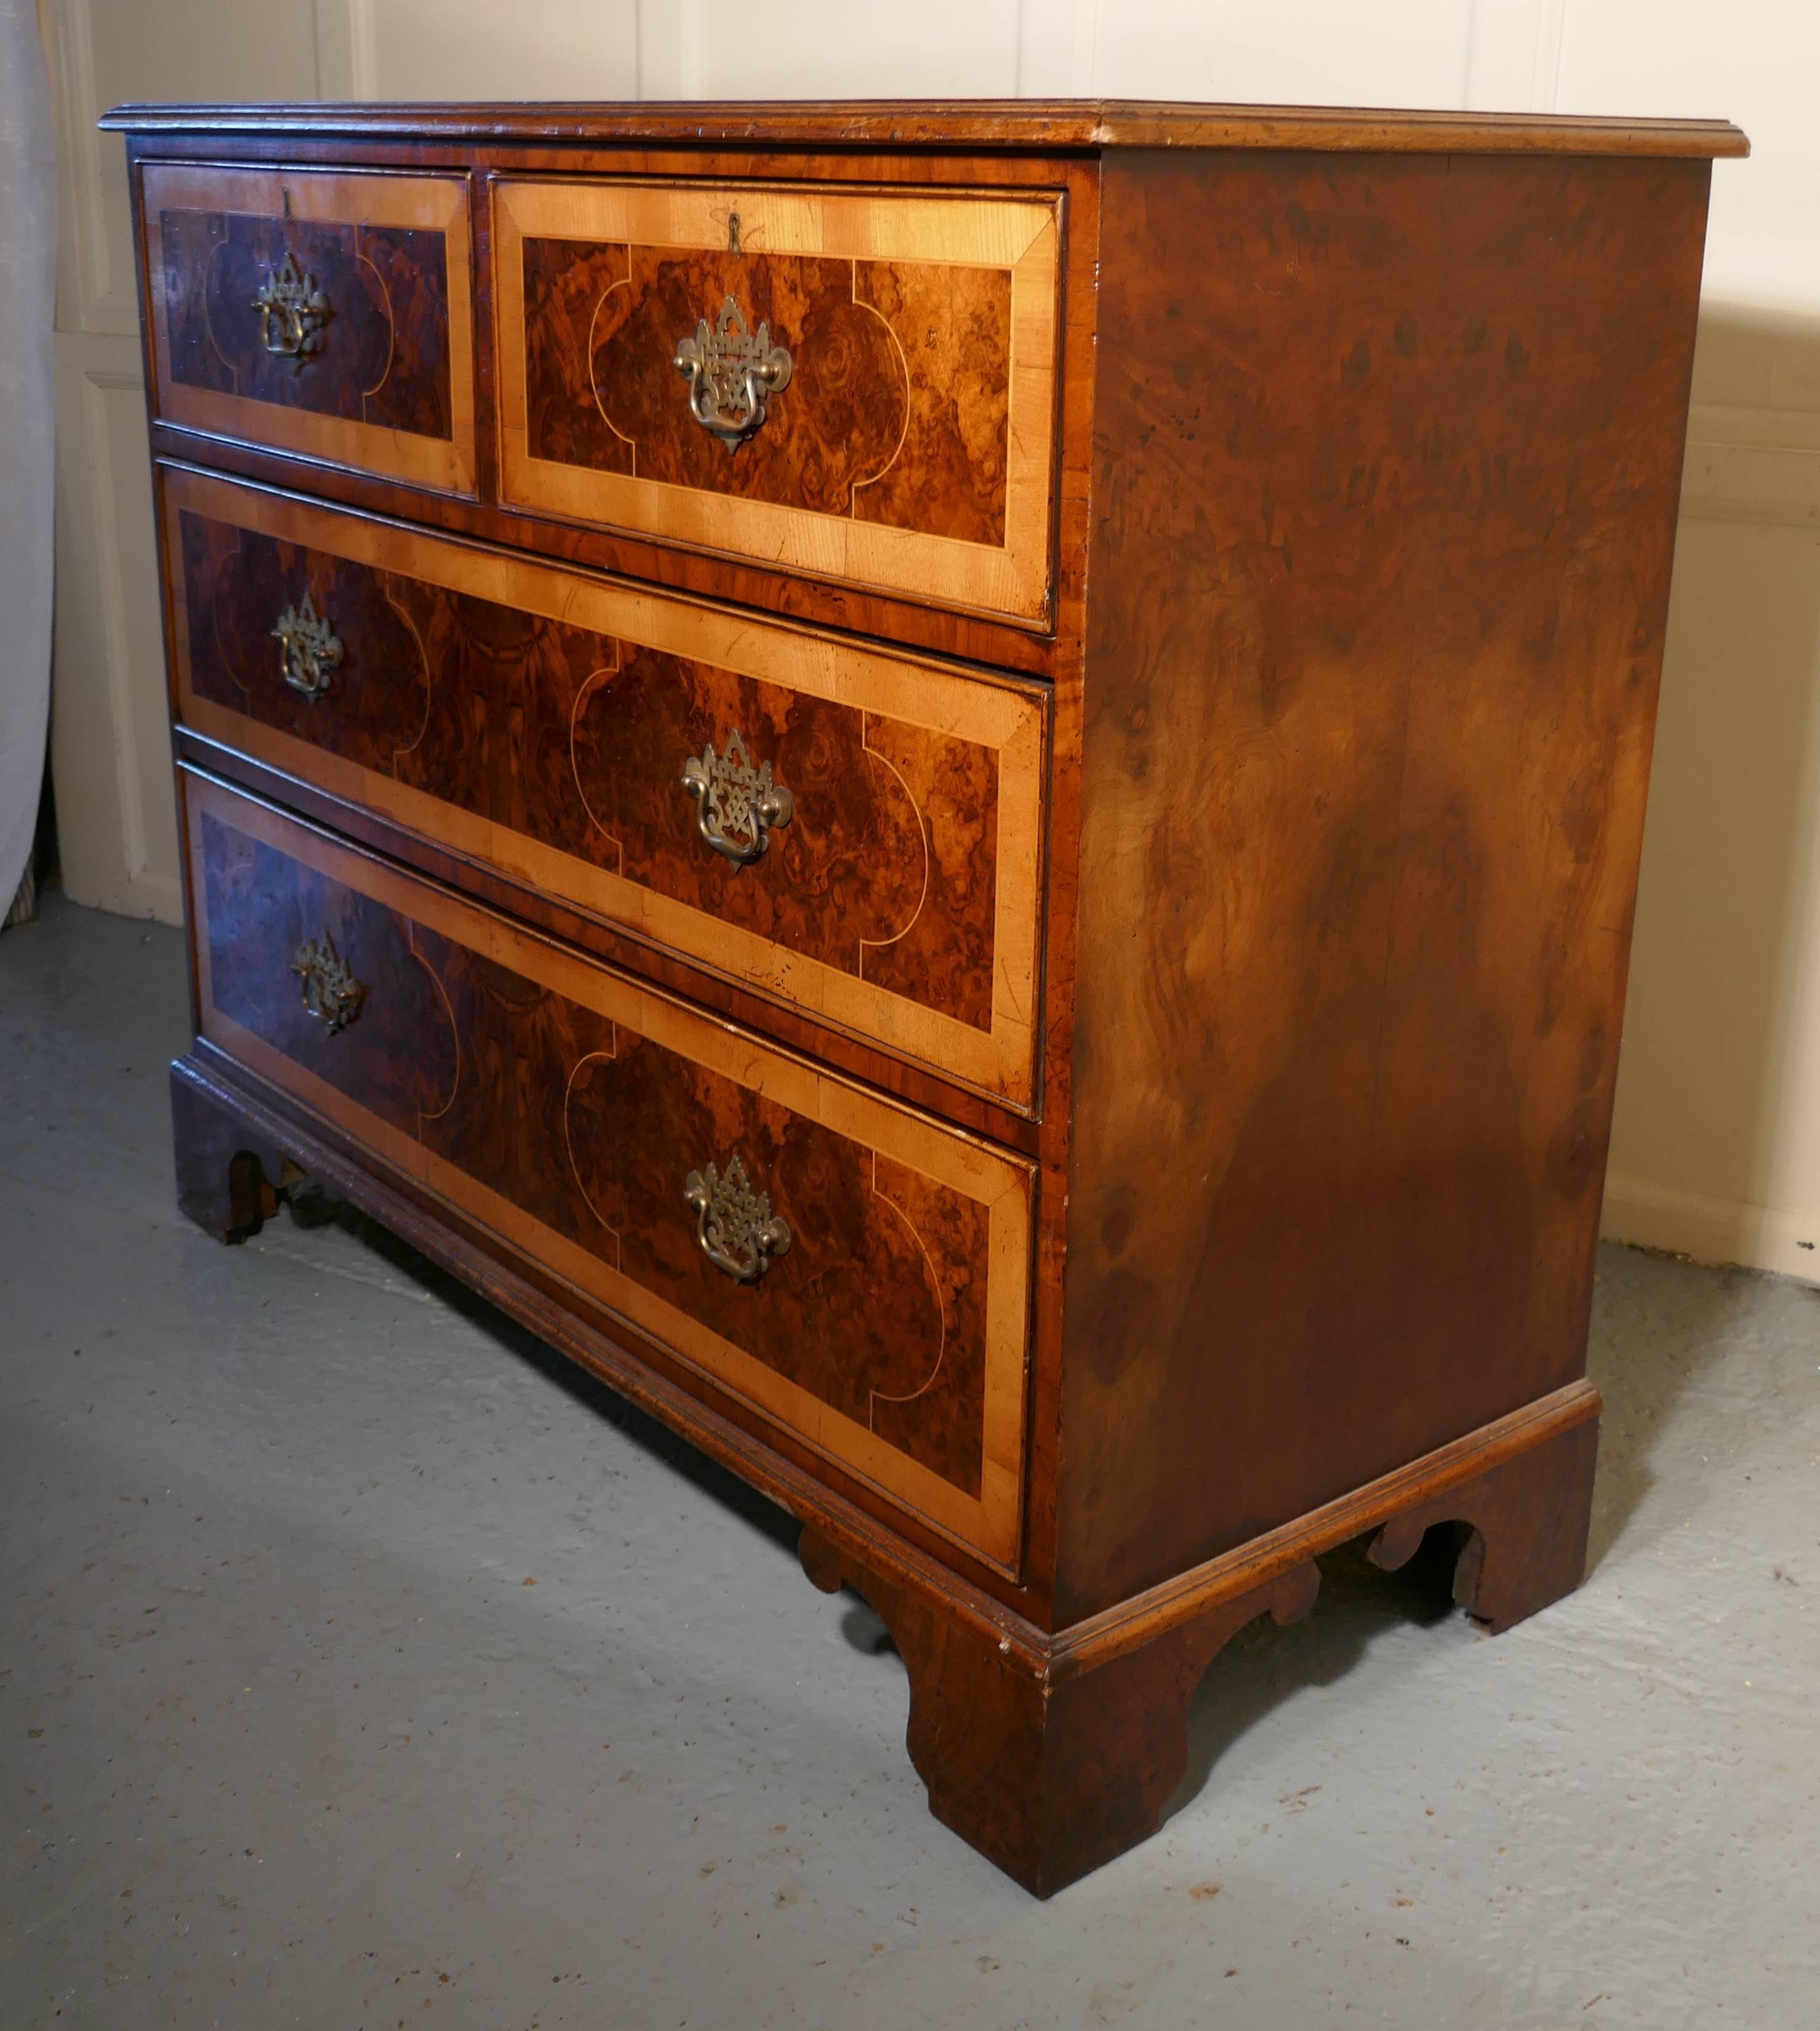 Early 19th century large inlaid walnut and satinwood chest of drawers

This is a wonderful looking piece, the chest is in Walnut the veneers are of the finest quality, they are excellently matched, even at the sides care has been taken to select